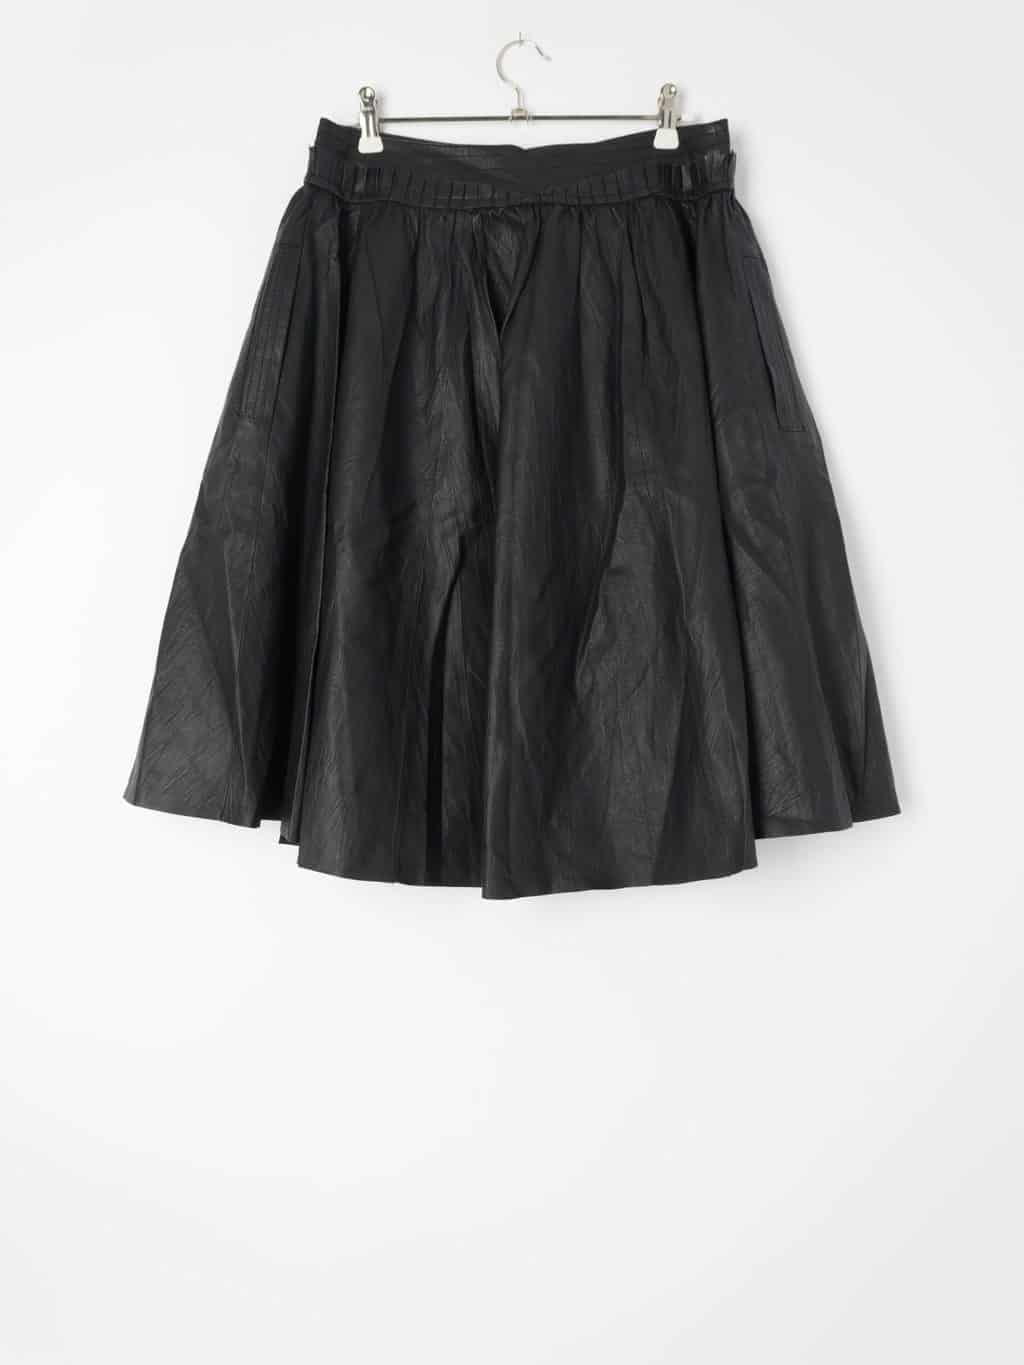 Womens 1980s style vintage leather skirt with ruffled waist and zipper ...